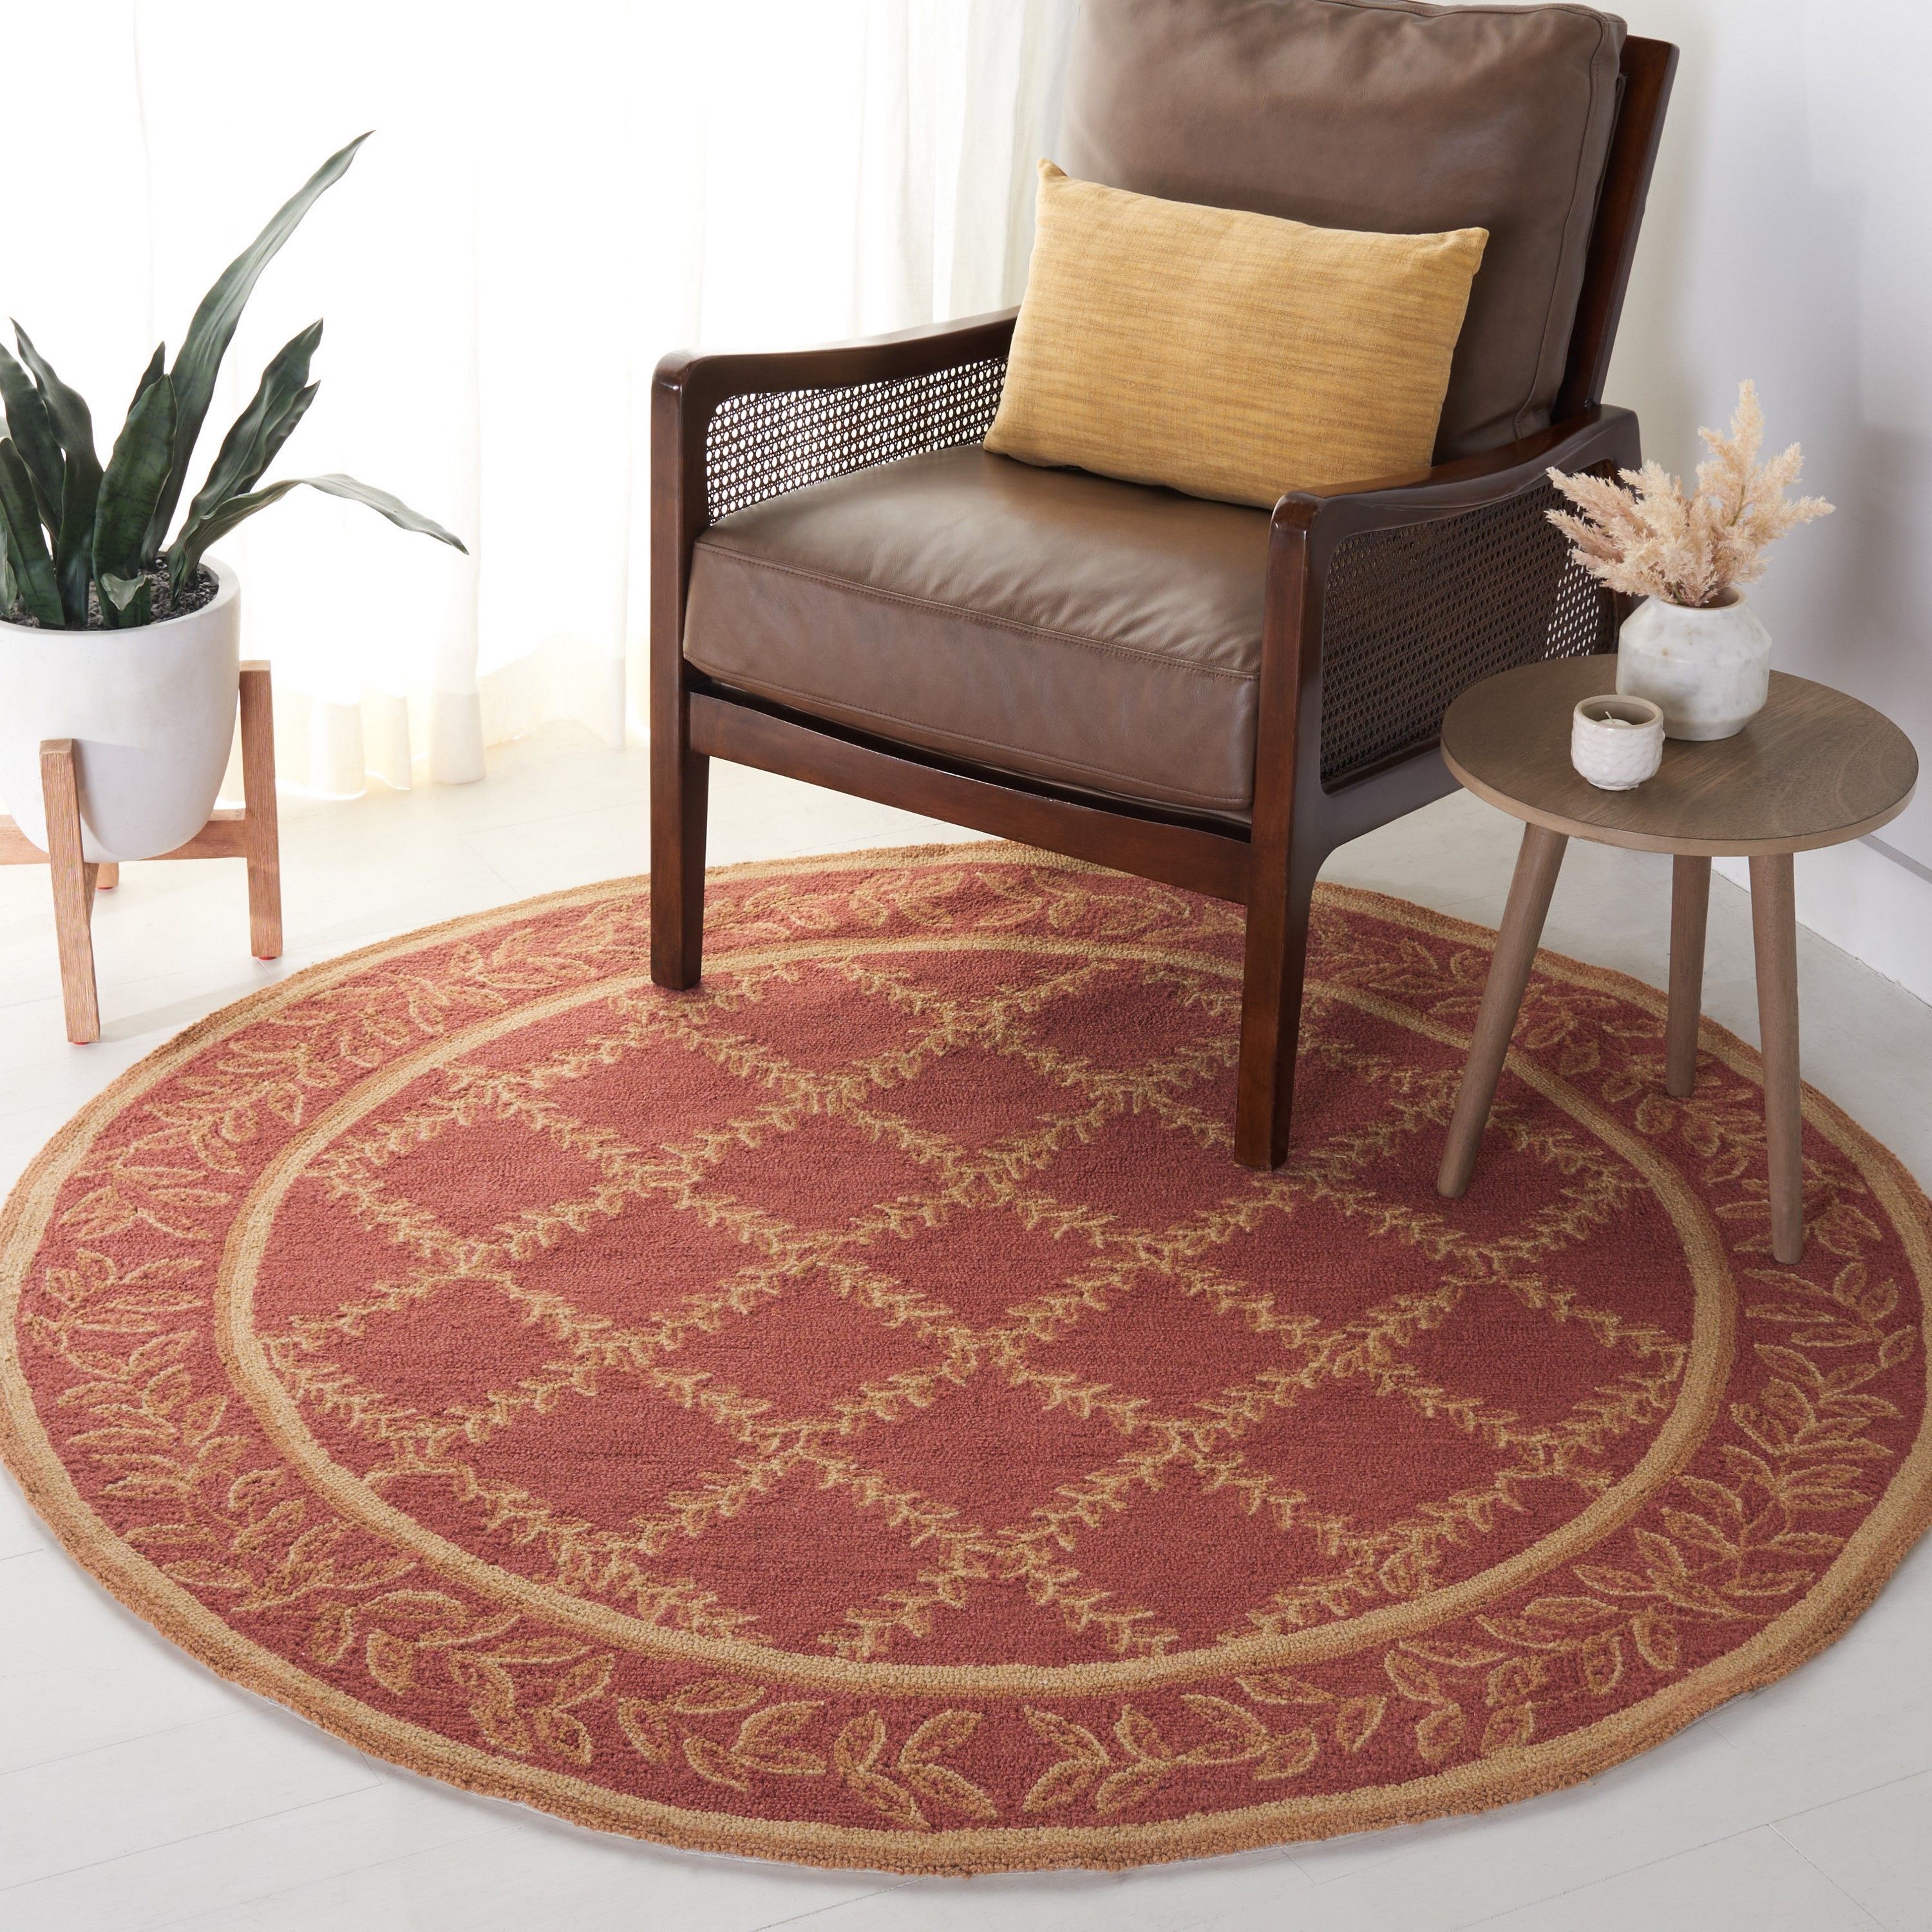 Safavieh Chelsea Lattice 8 X 10 Wool Rust/gold Oval Indoor Trellis Area Rug  In The Rugs Department At Lowes Intended For Lattice Oval Rugs (View 4 of 15)